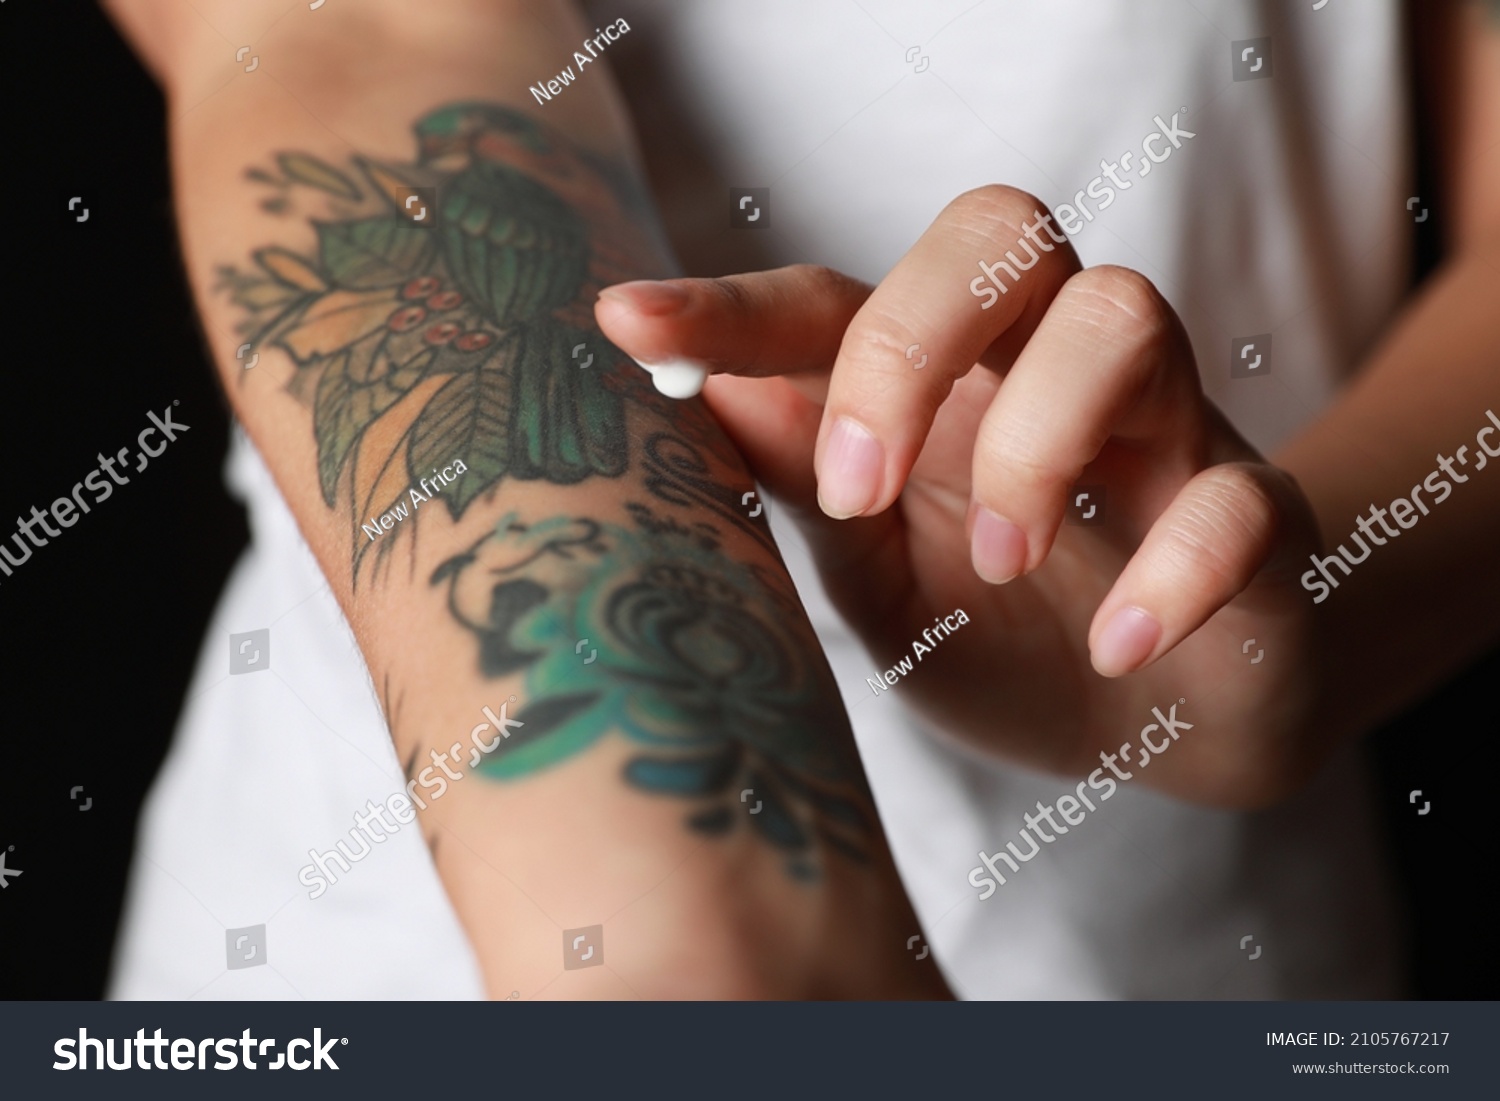 Woman applying cream on her arm with tattoos against black background, closeup #2105767217